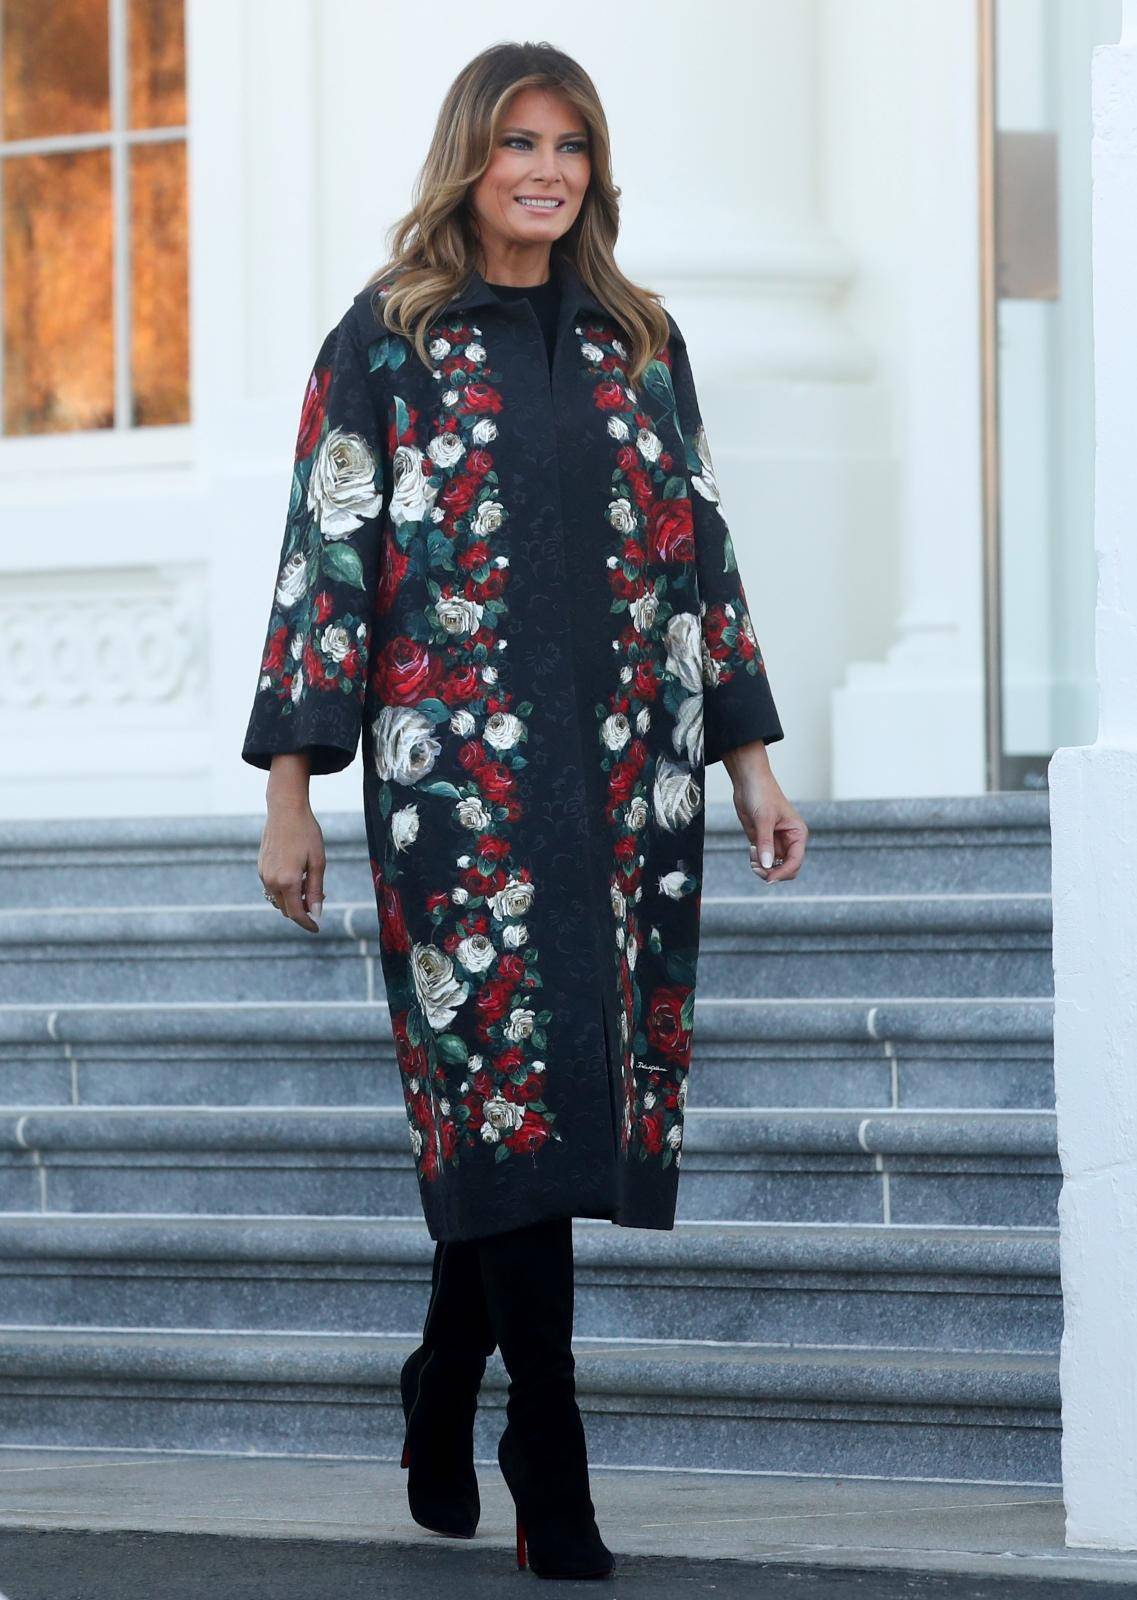 U.S. first lady Melania Trump walks out to receive the White House Christmas tree at the White House in Washington